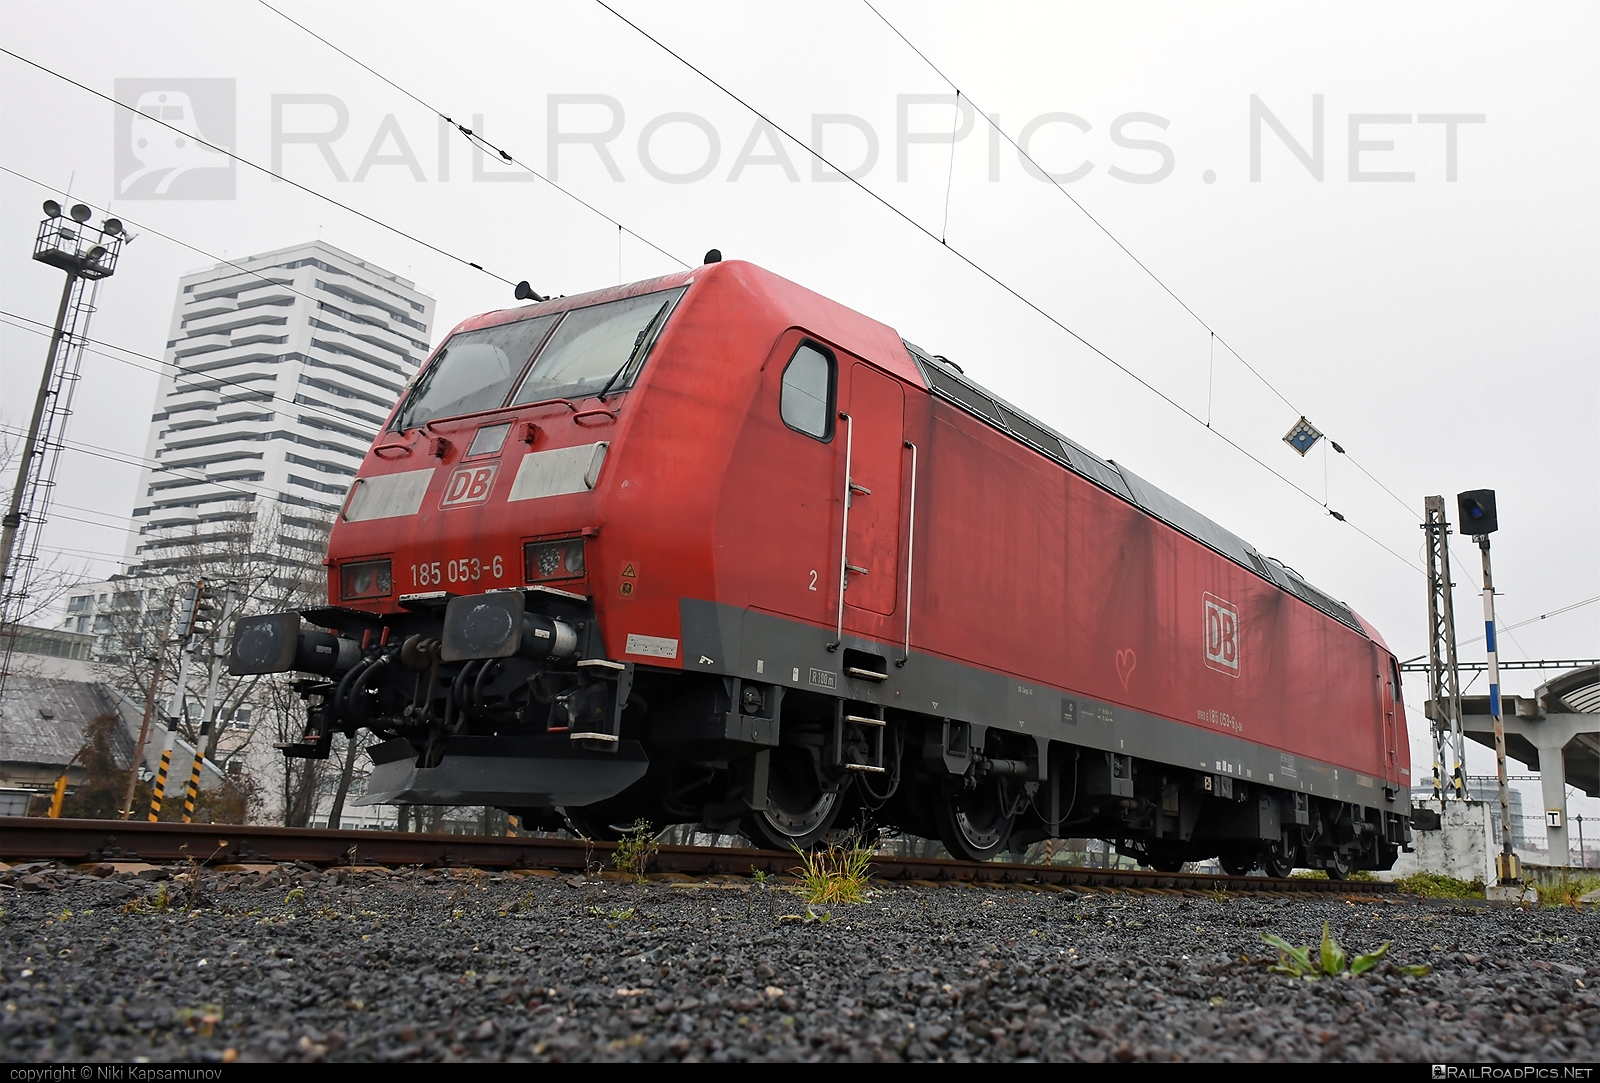 Bombardier TRAXX F140 AC1 - 185 053-6 operated by DB Cargo AG #bombardier #bombardiertraxx #db #dbcargo #dbcargoag #traxx #traxxf140 #traxxf140ac #traxxf140ac1